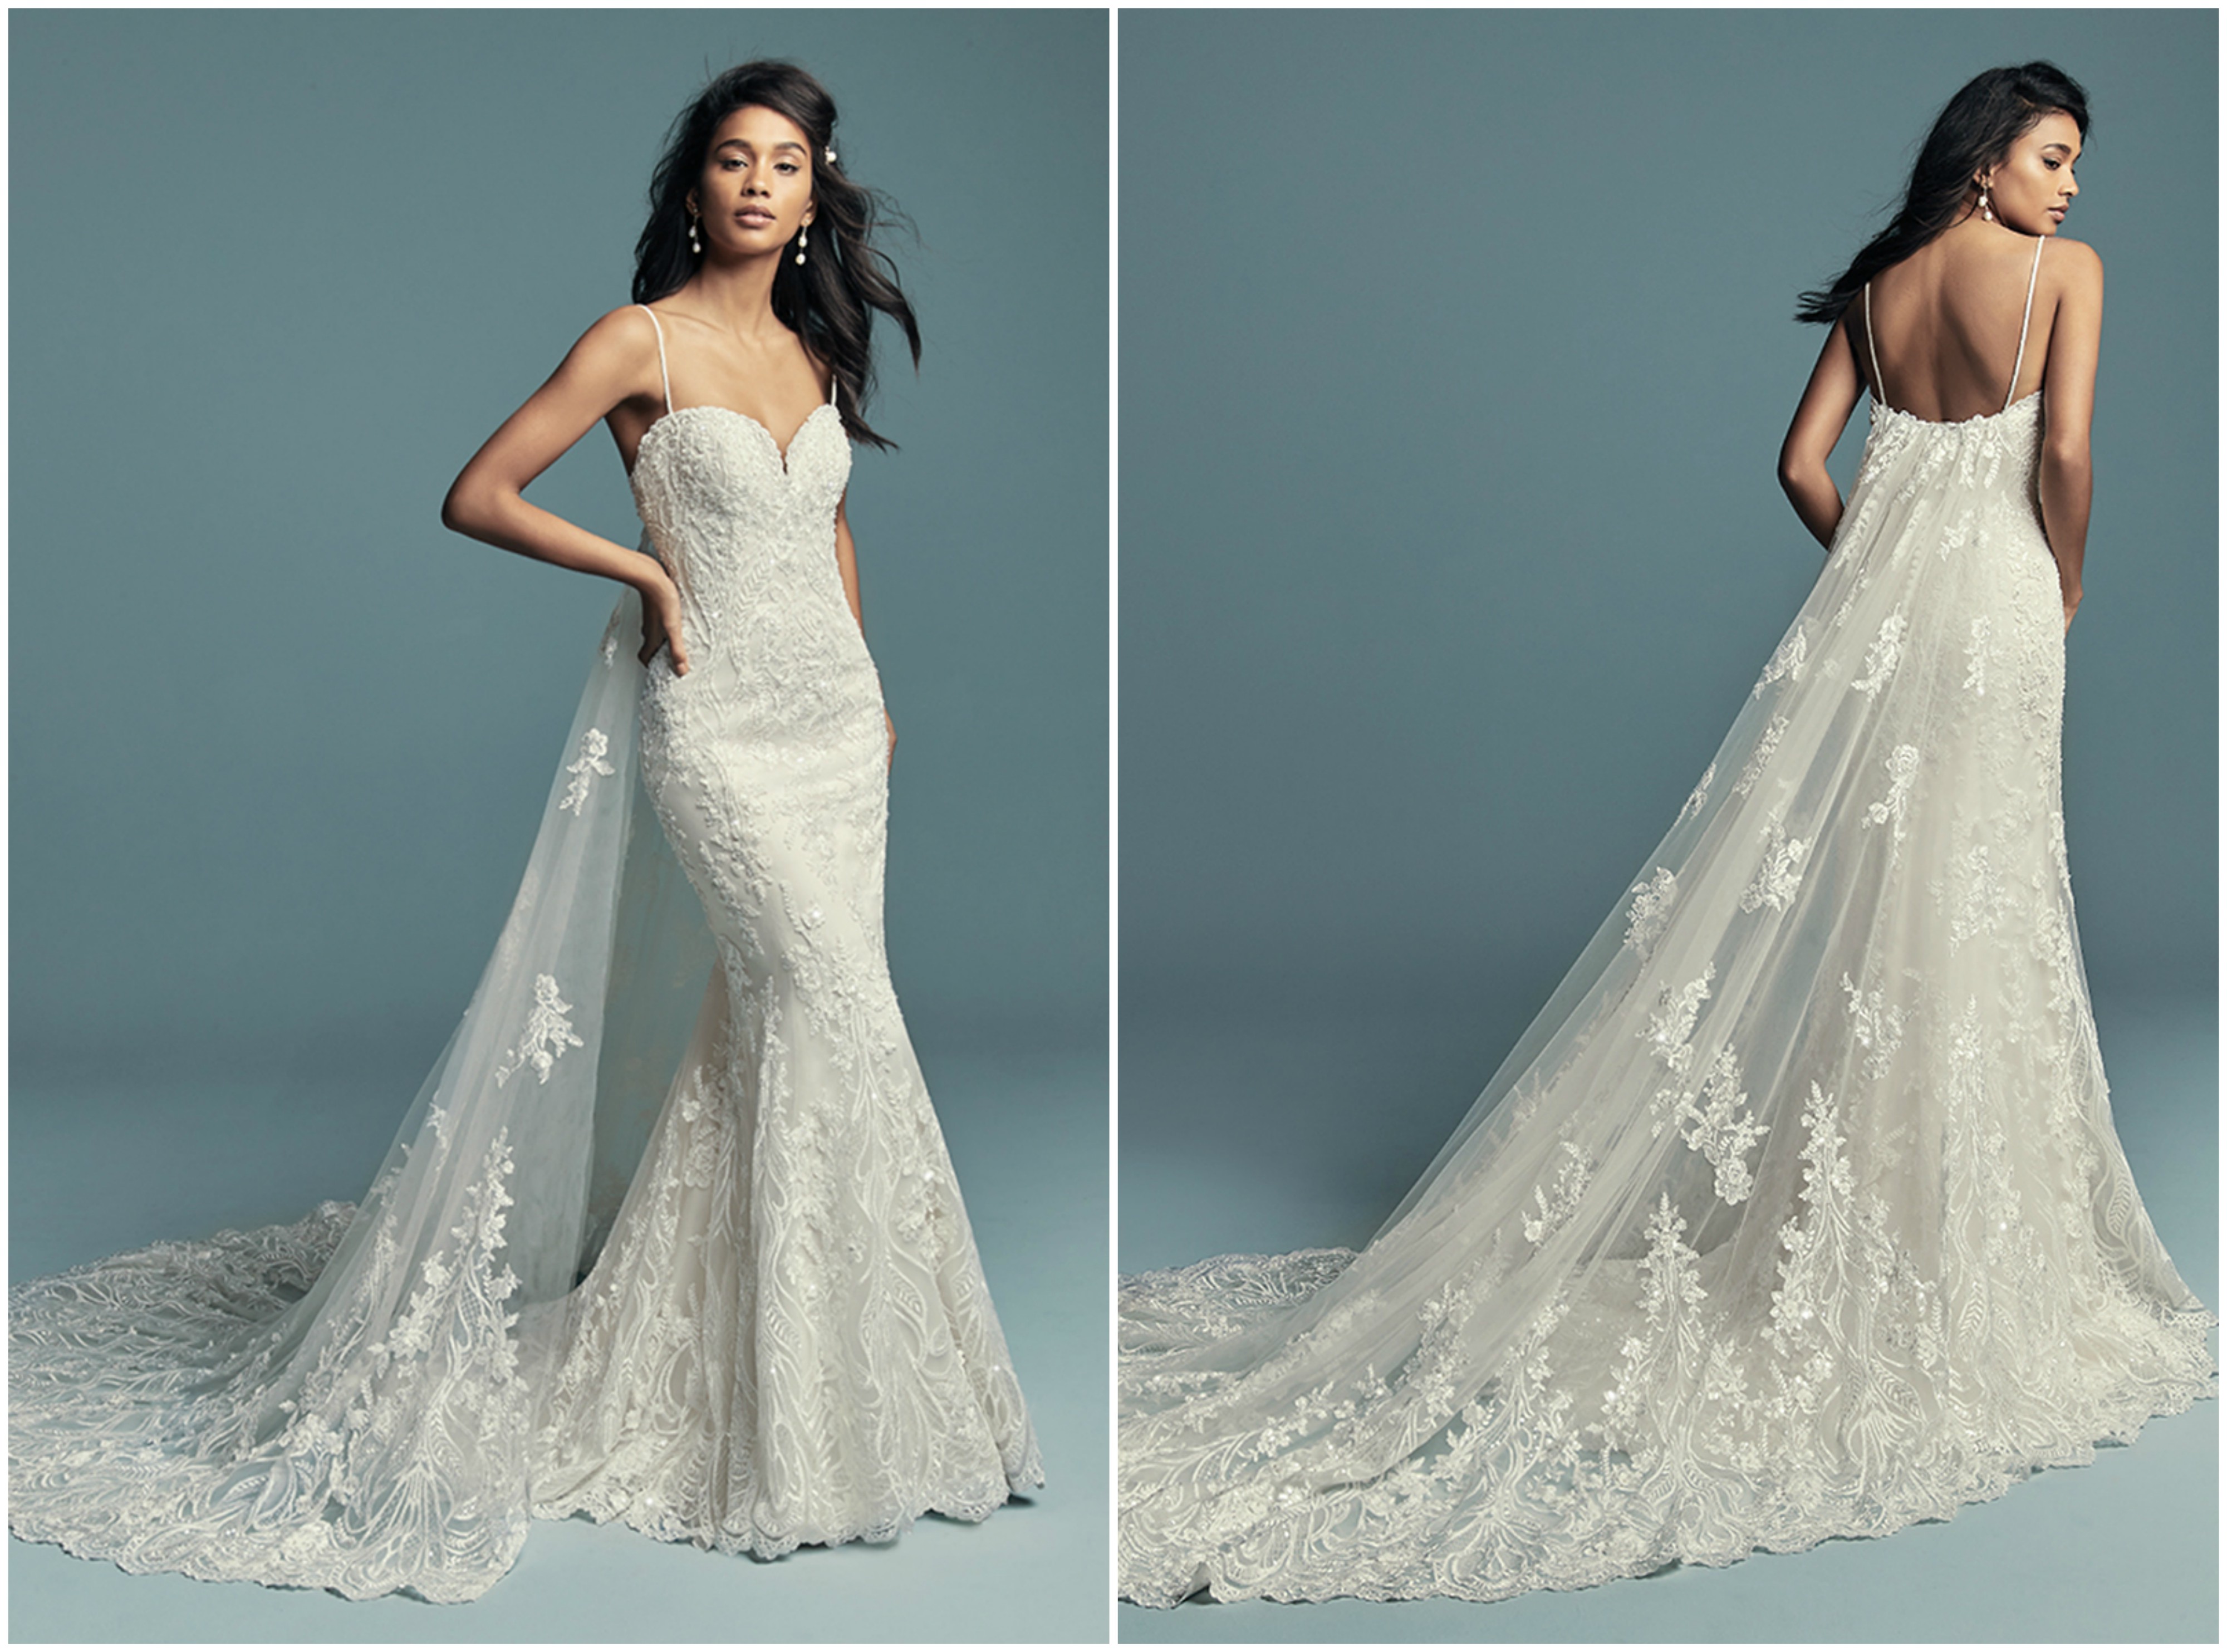 <a href="https://www.maggiesottero.com/maggie-sottero/gwendolyn/11479" target="_blank">Maggie Sottero</a>